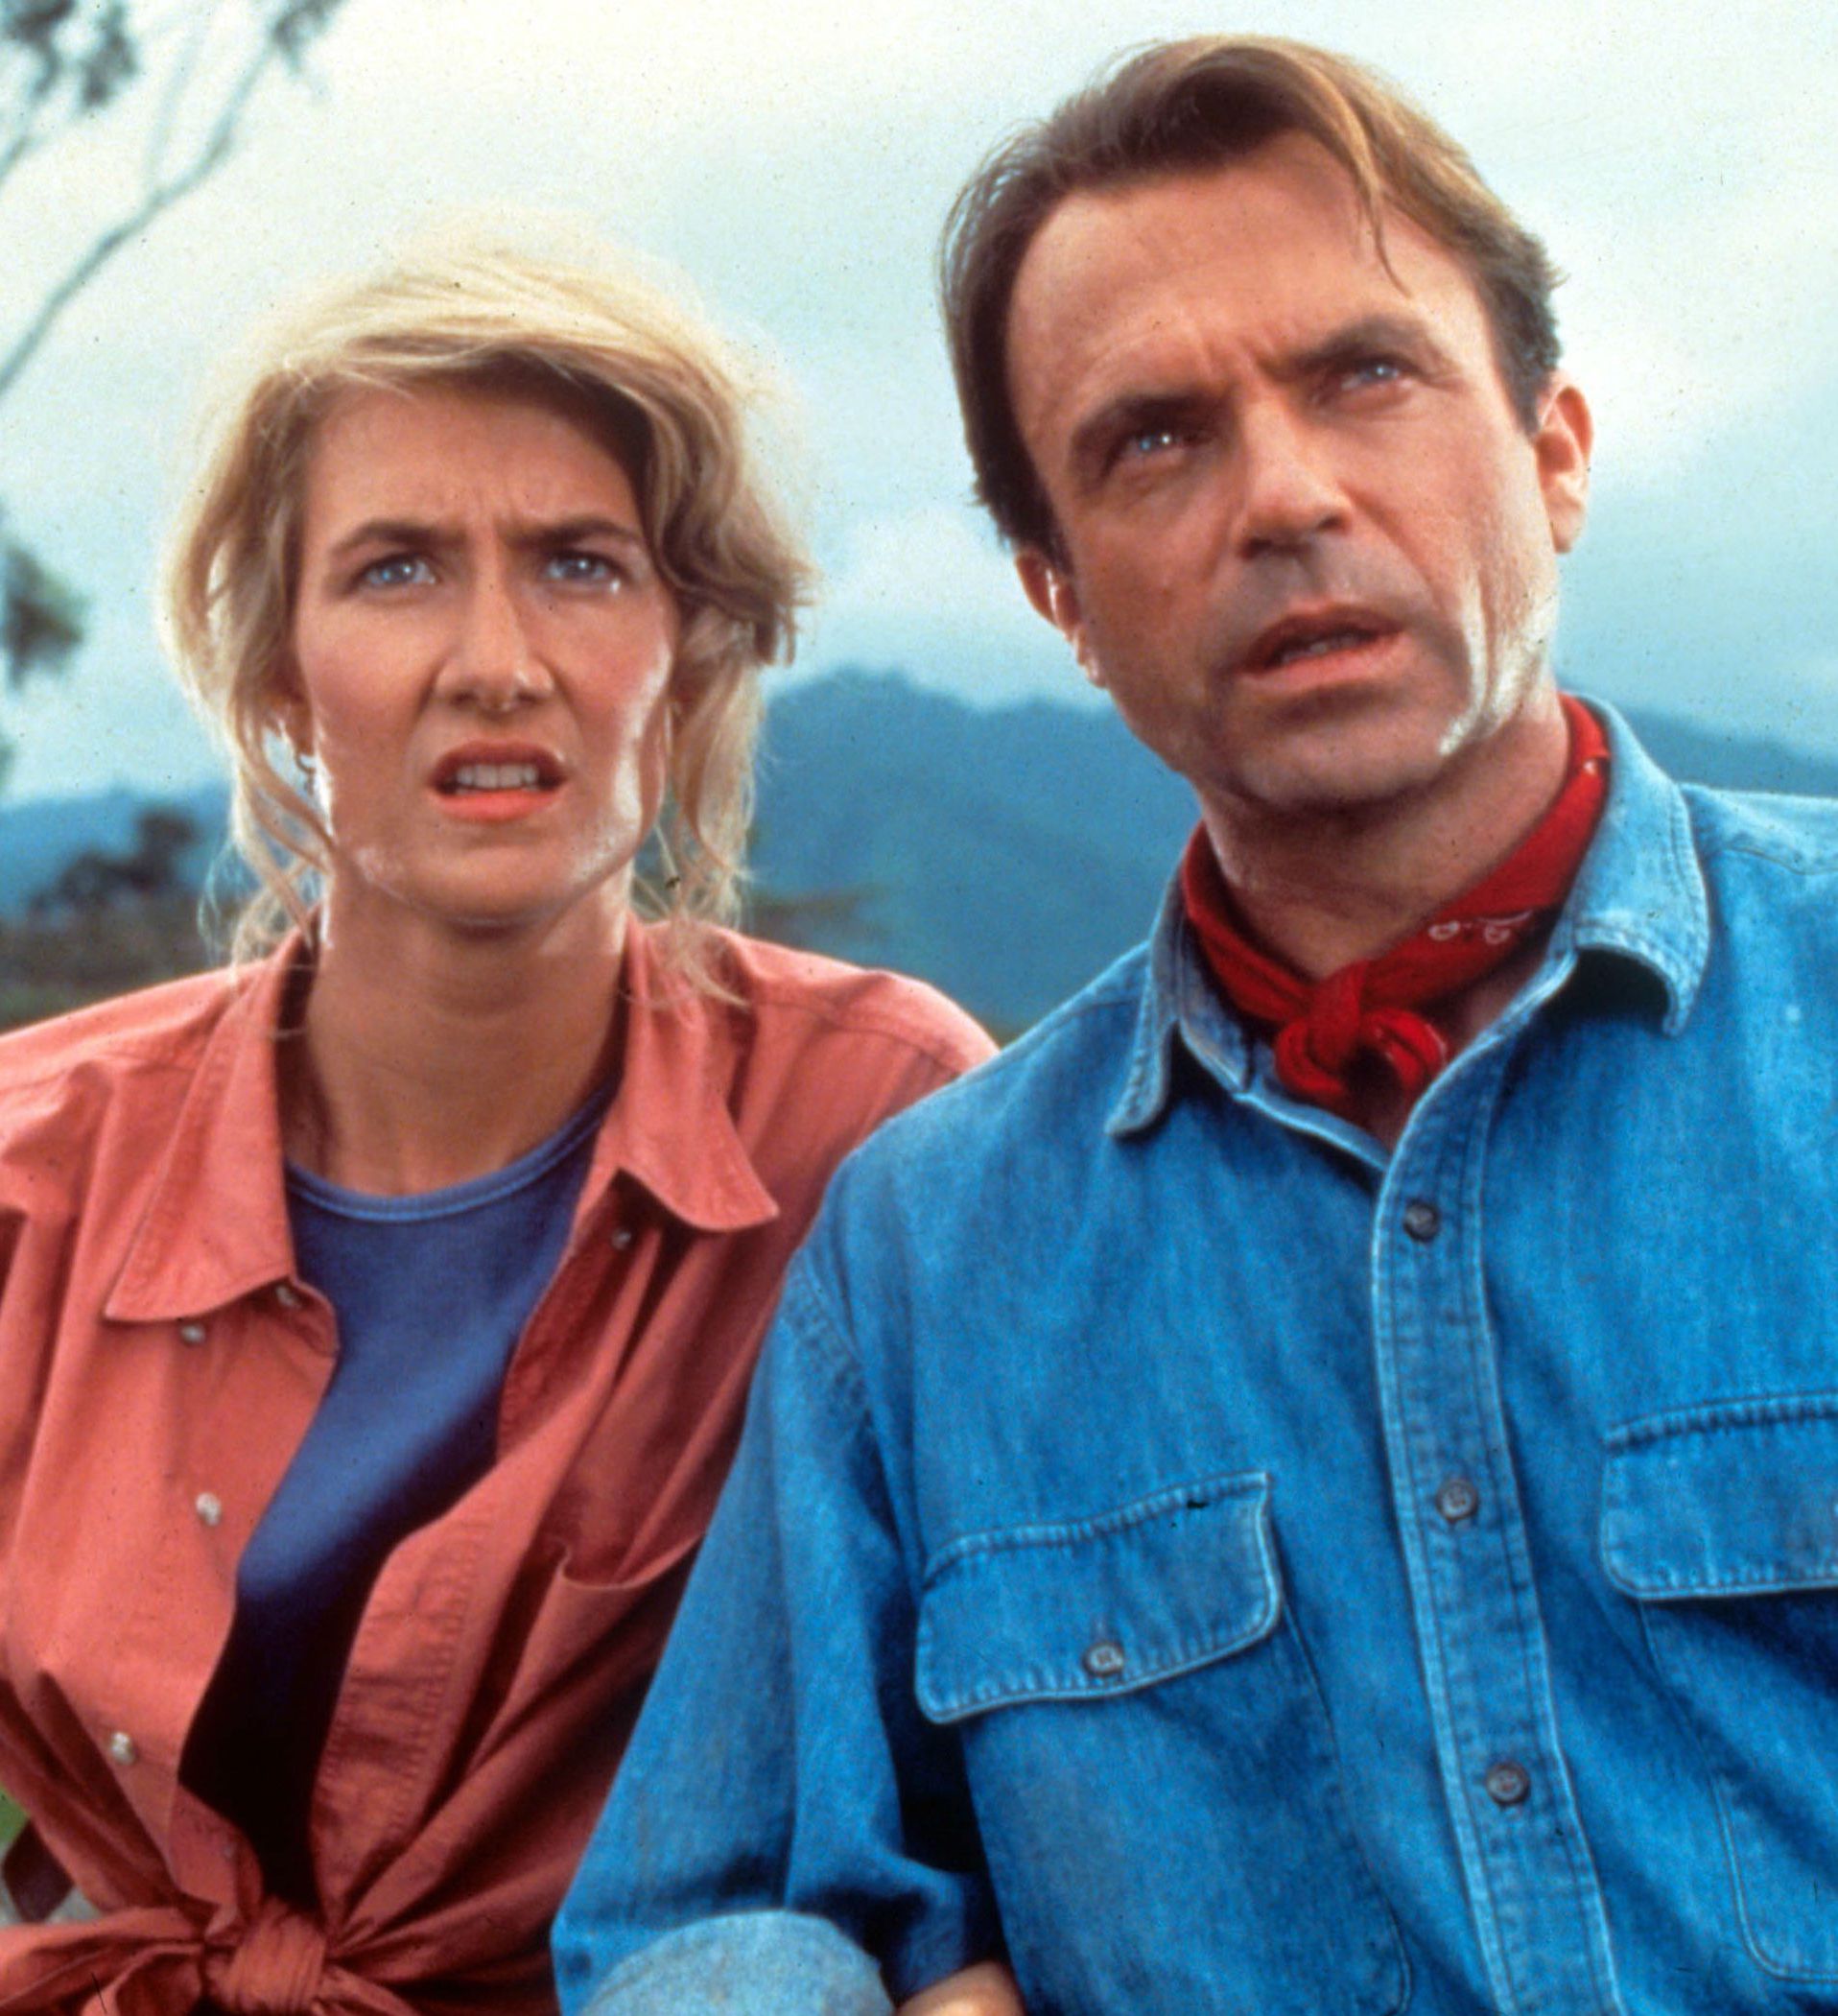 Laura Dern and Sam Neill as Ellie Satler and Alan Grant in Jurassic Park